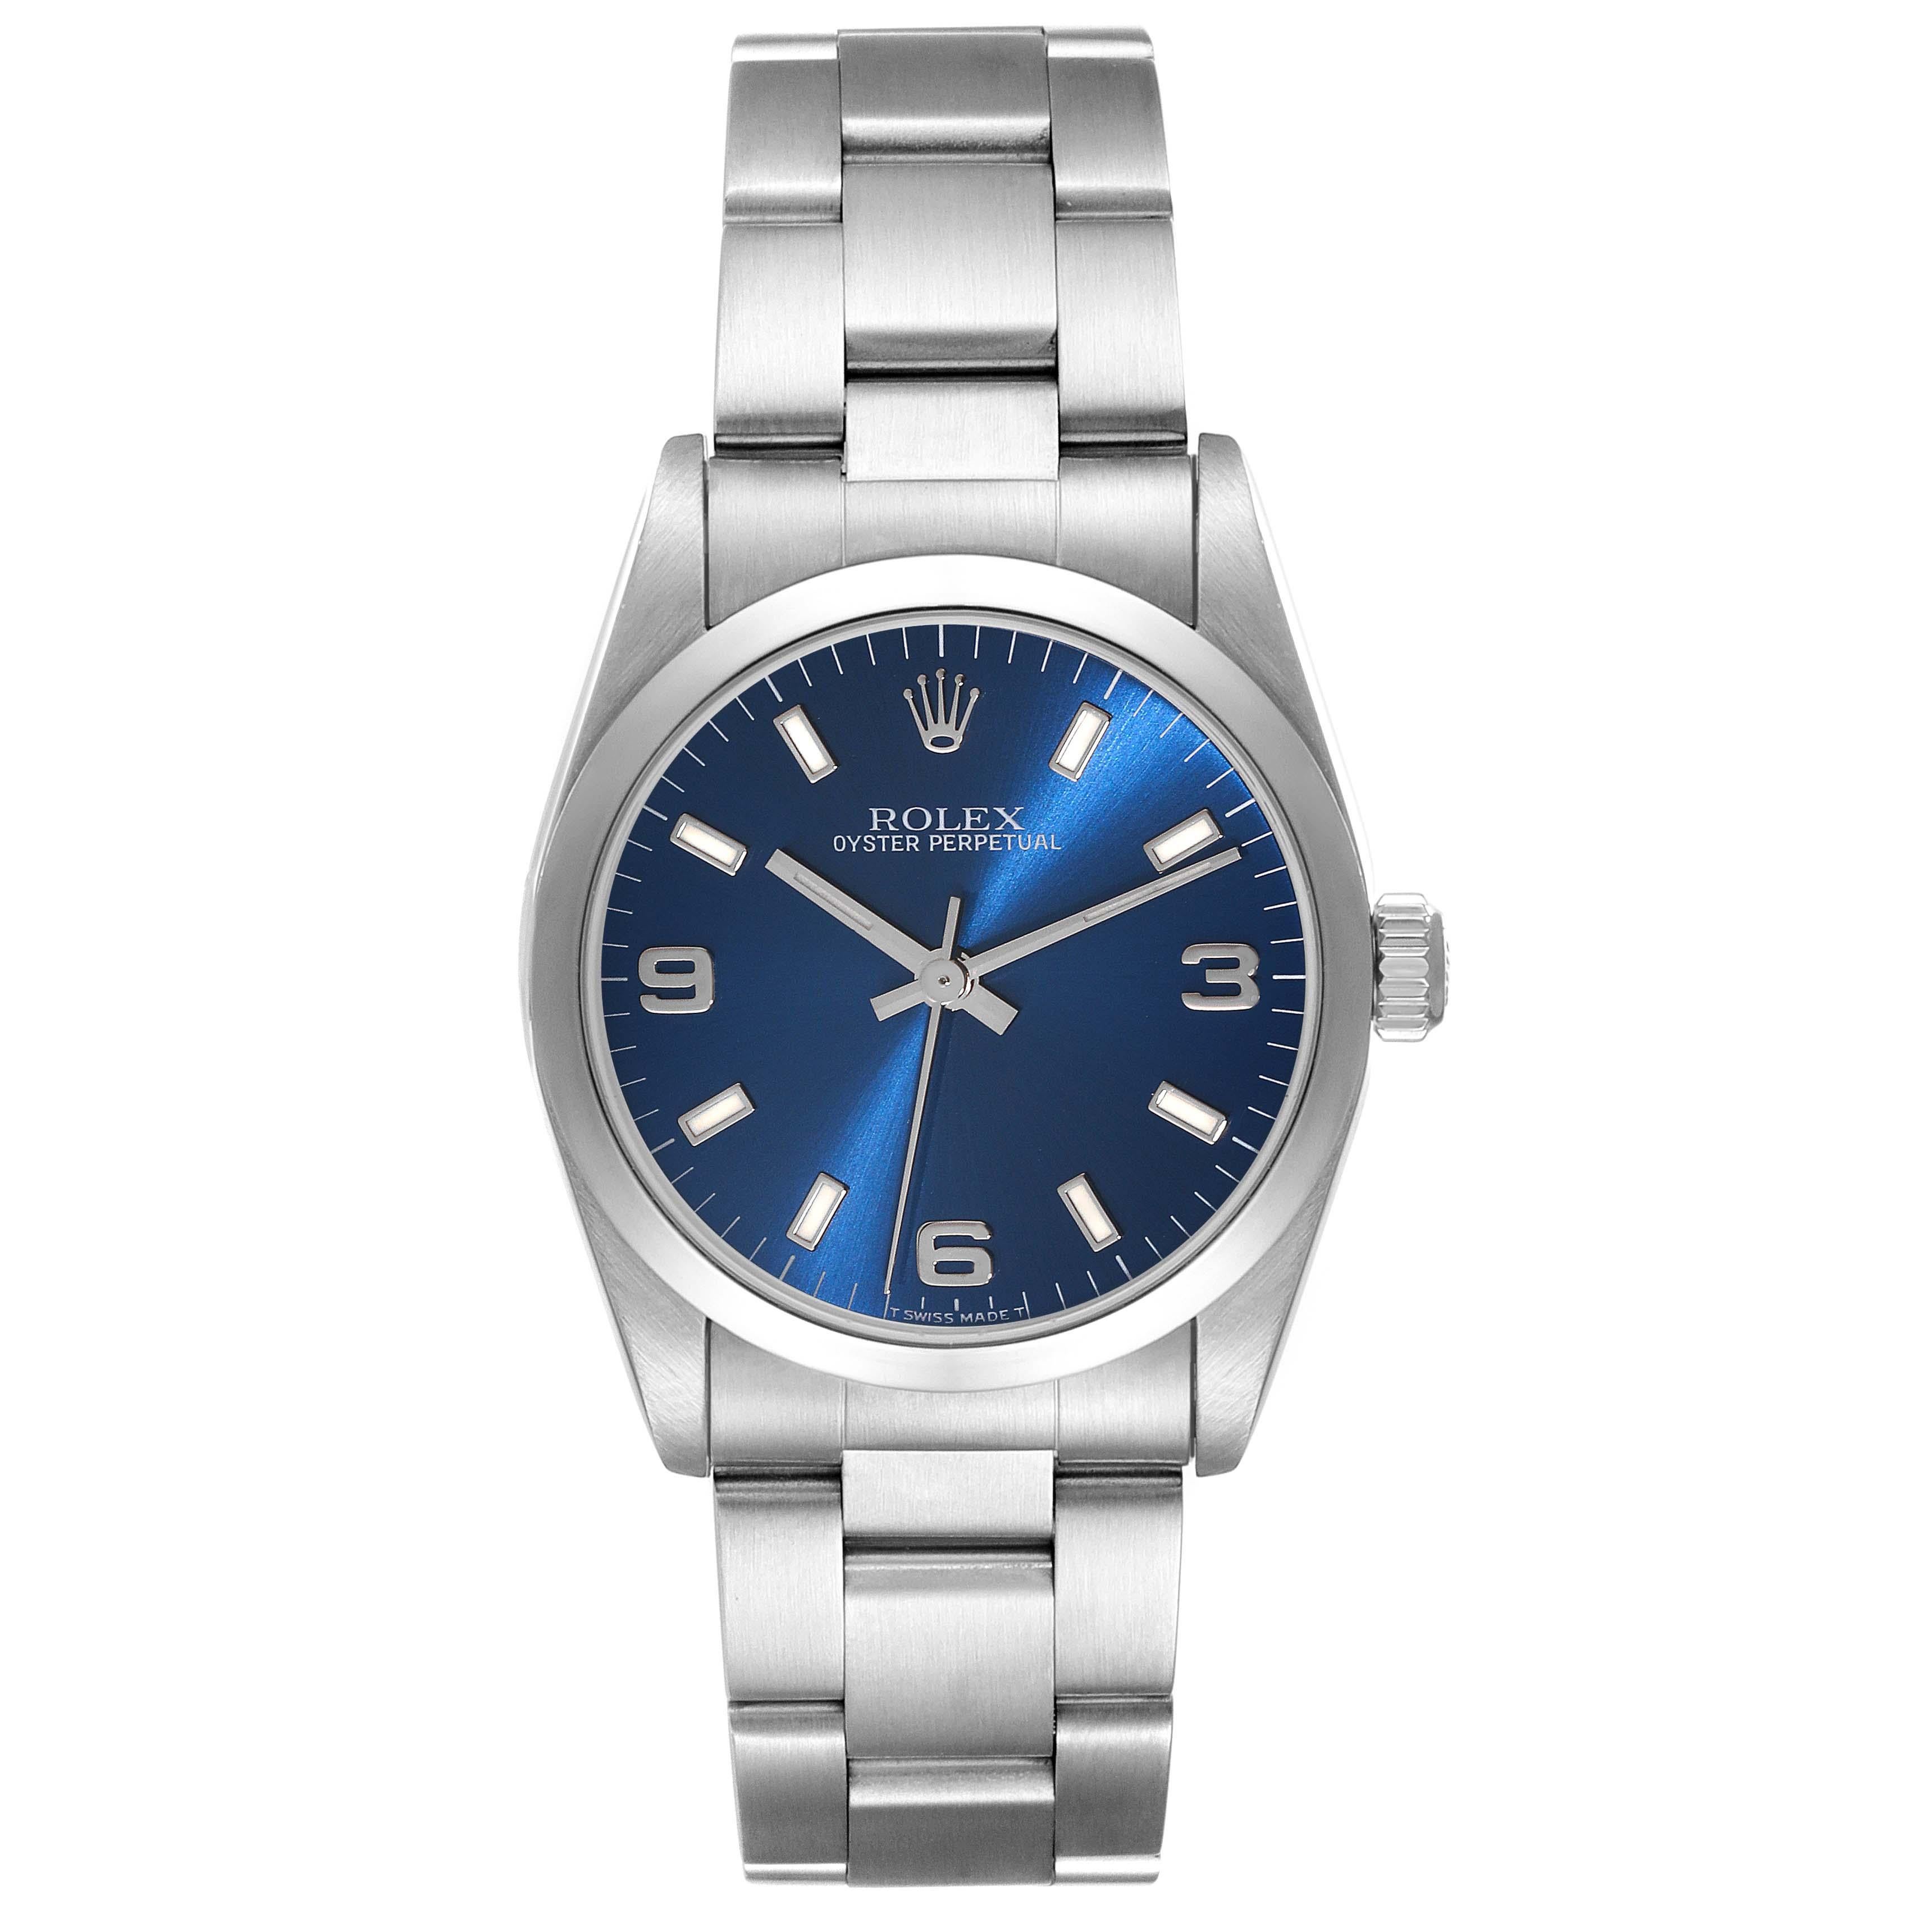 Rolex Midsize 31mm Blue Dial Automatic Steel Ladies Watch 67480 Box Papers. Automatic self-winding movement. Stainless steel oyster case 31.0 mm in diameter. Rolex logo on the crown. Stainless steel smooth bezel. Scratch resistant sapphire crystal.